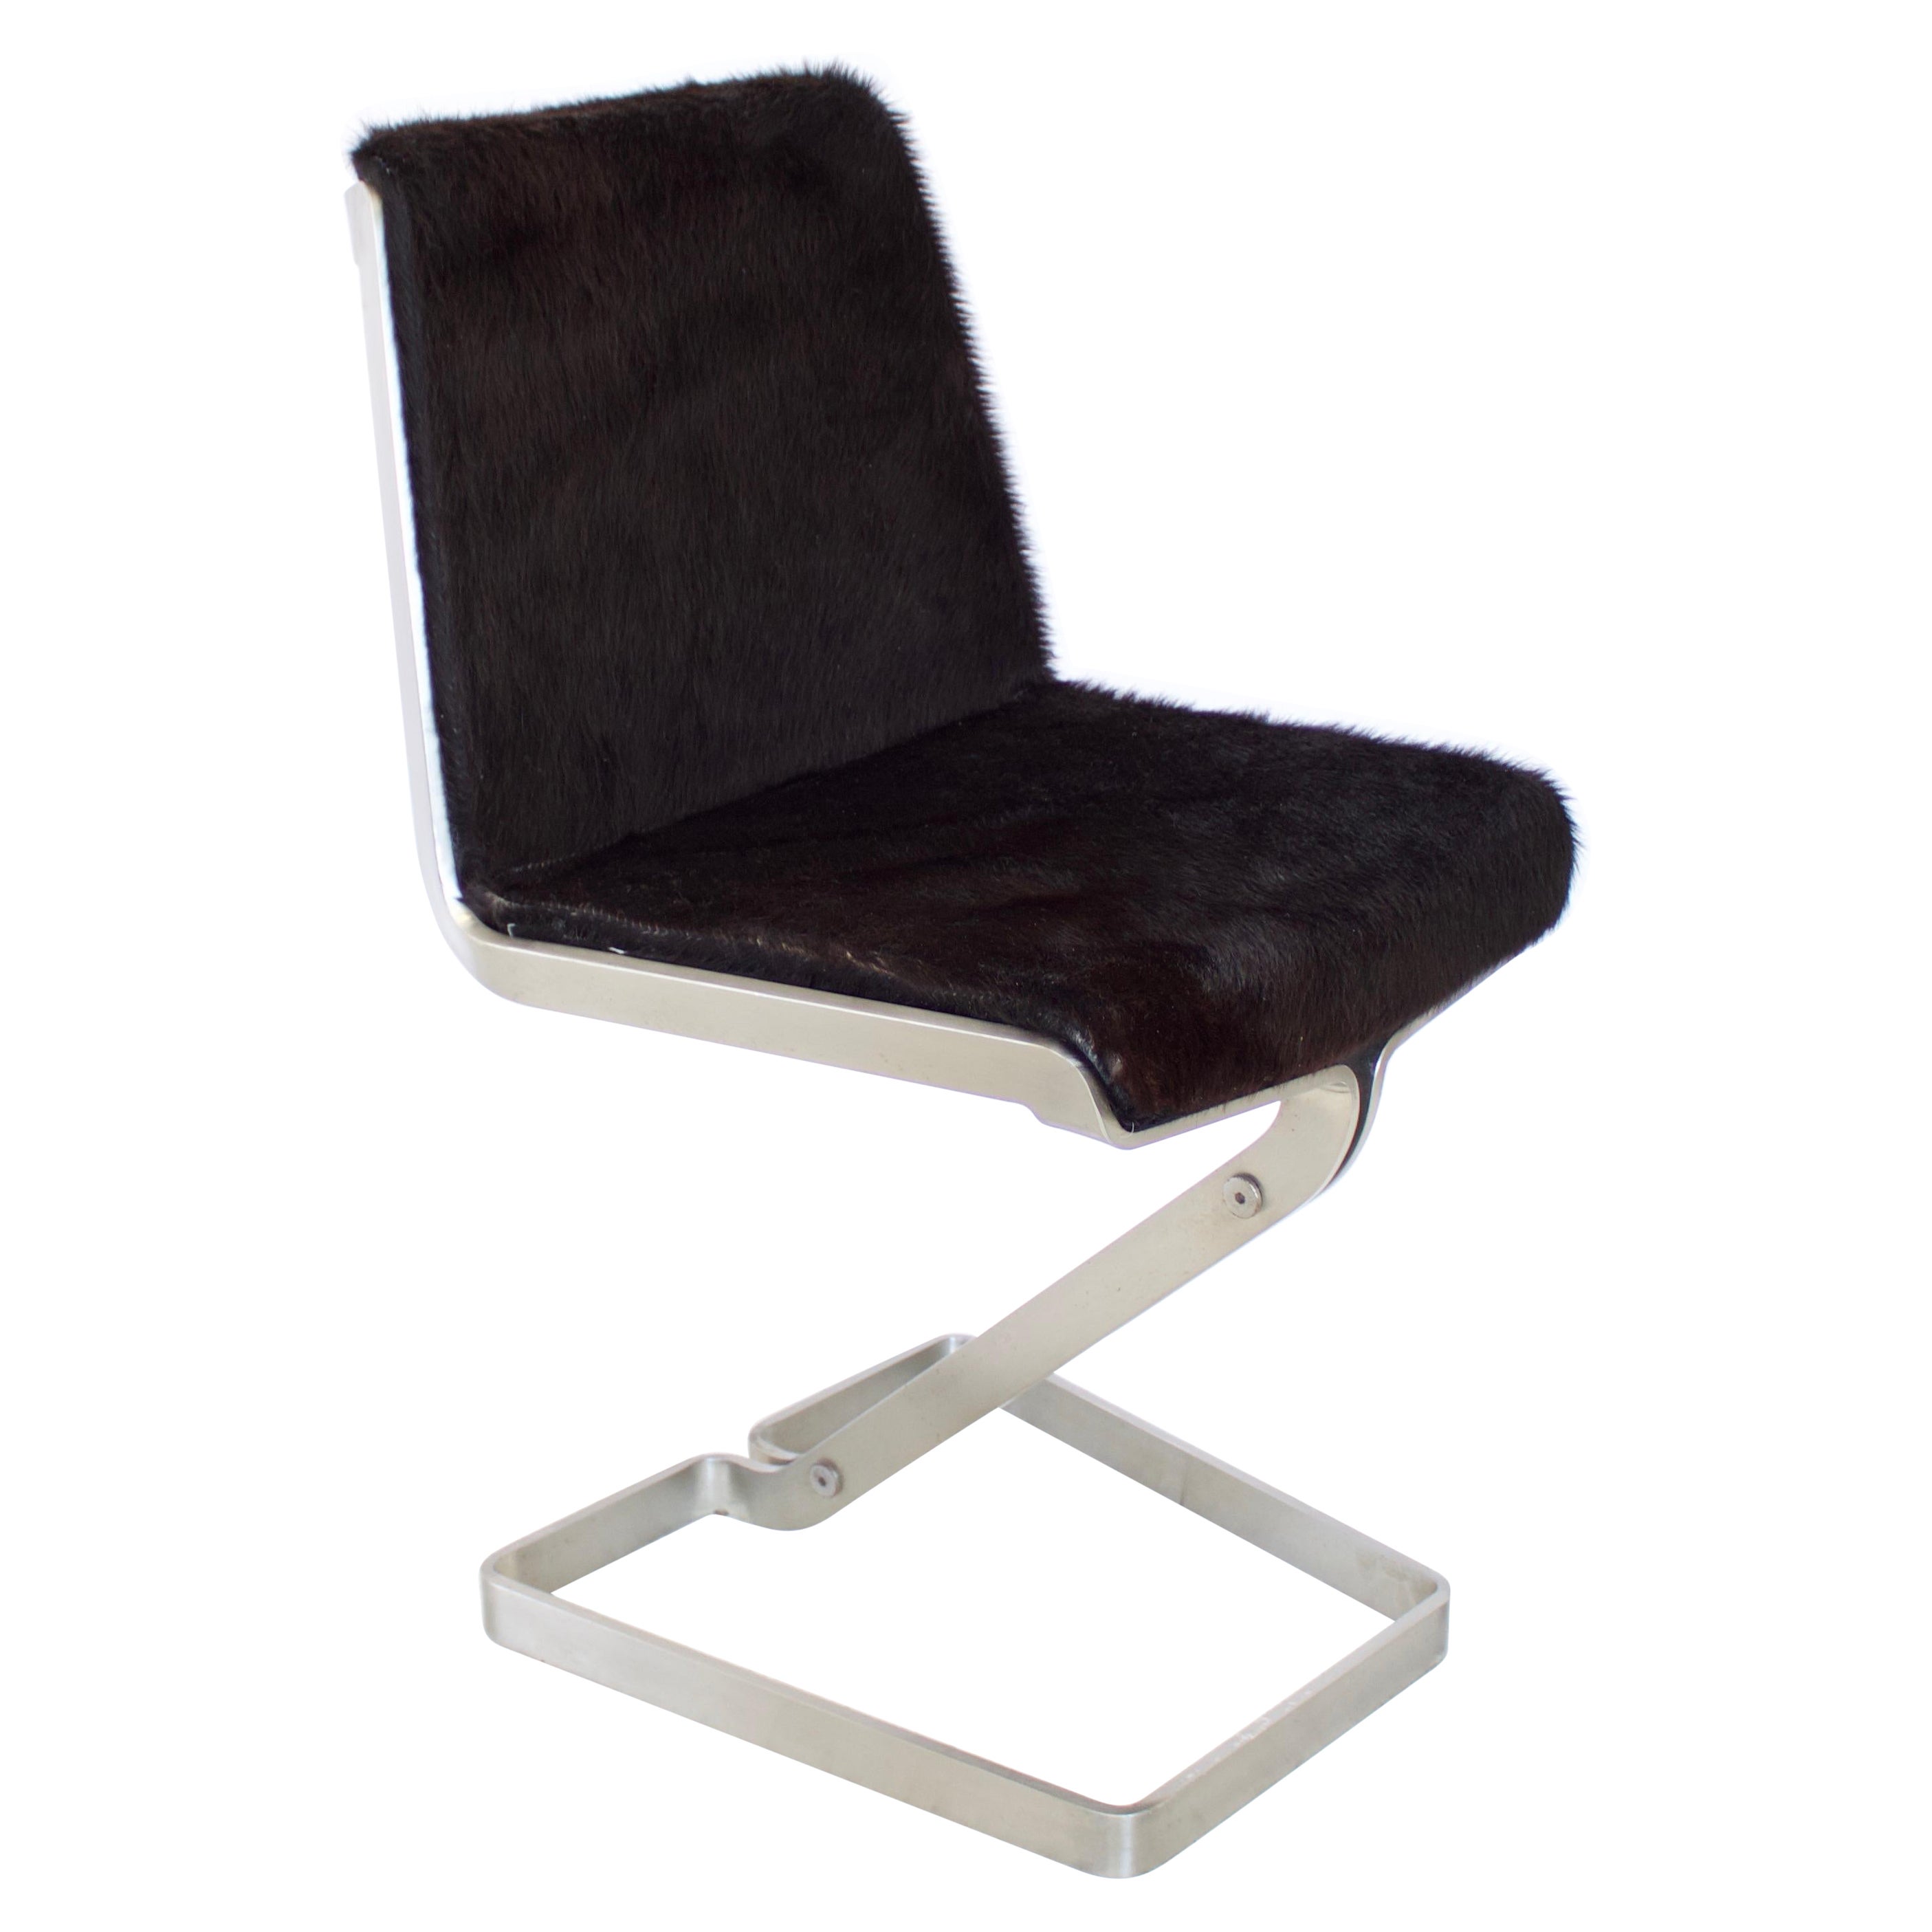 Italian Stainless Steel Desk Chair by Forma Nova, circa 1970 For Sale